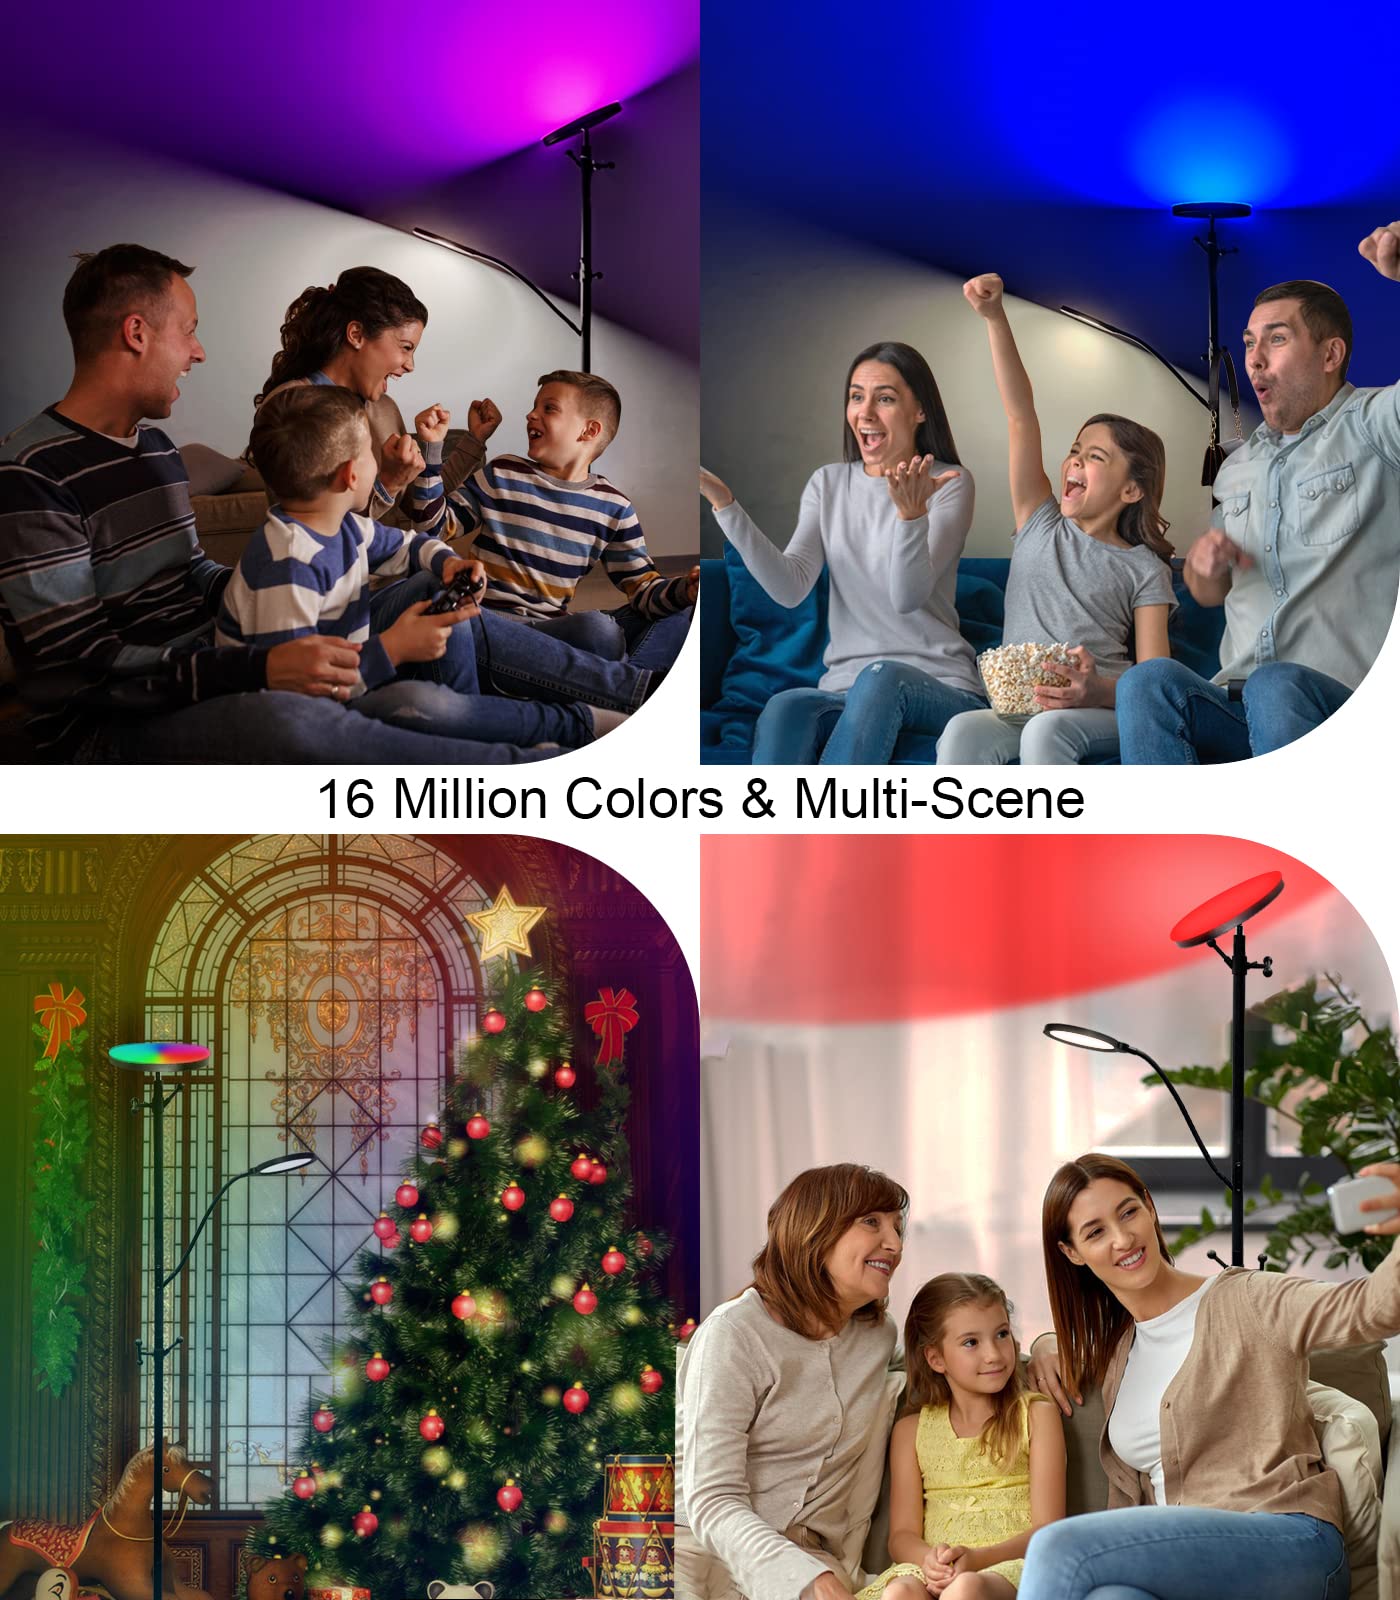 RGB Smart Floor Lamp , living room lamp,clothes and hat lamp, LED floor lamp Sky Main Light and Side Reading Lamp,standing lamp, Tall Lamp with Remote & Touch &APP Control for Living Room Bedroom